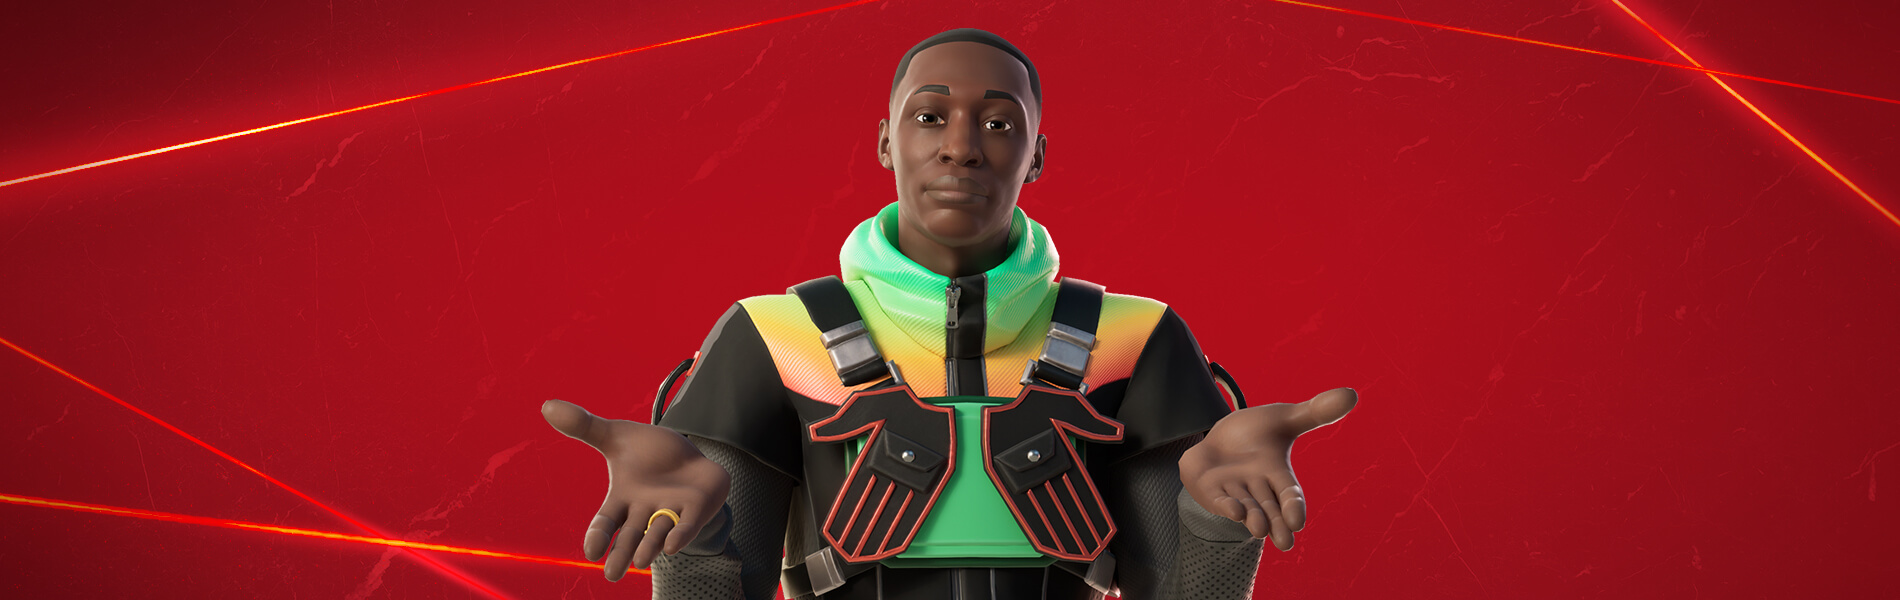 Fortnite Khaby Lame-Outfit